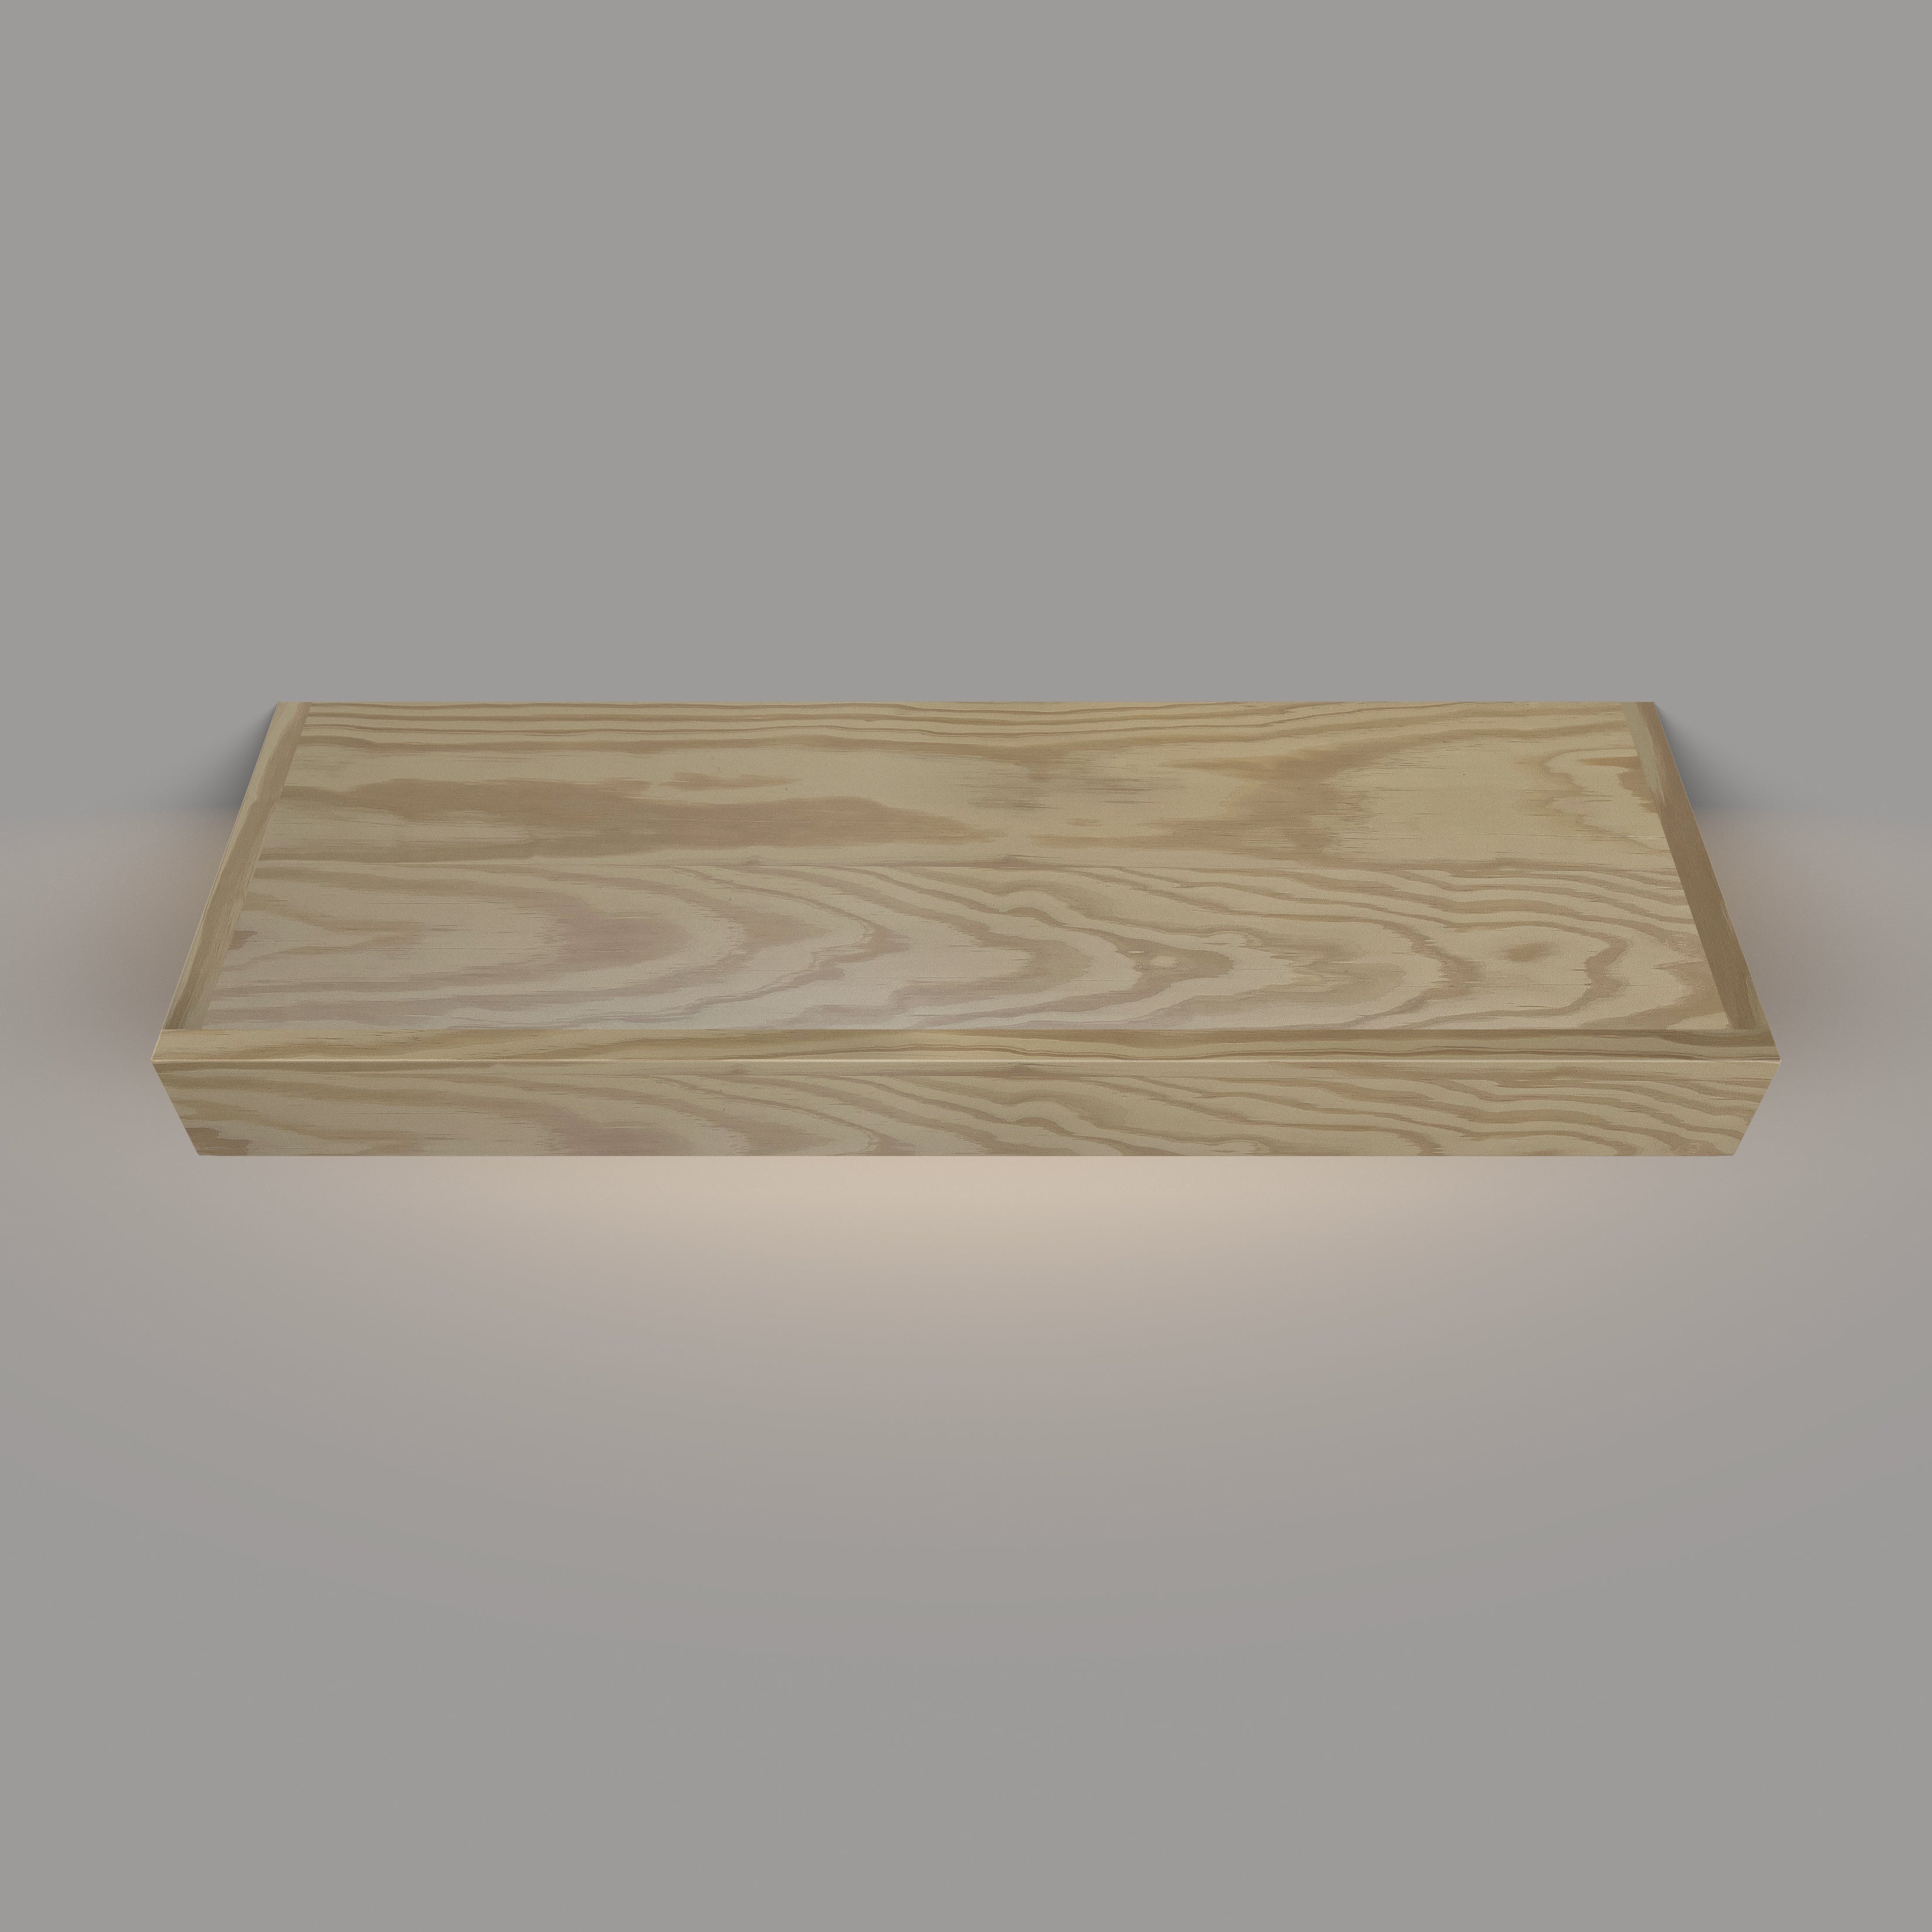 Pine 3 Inch Thick Lighted LED Floating Shelf - Hardwired